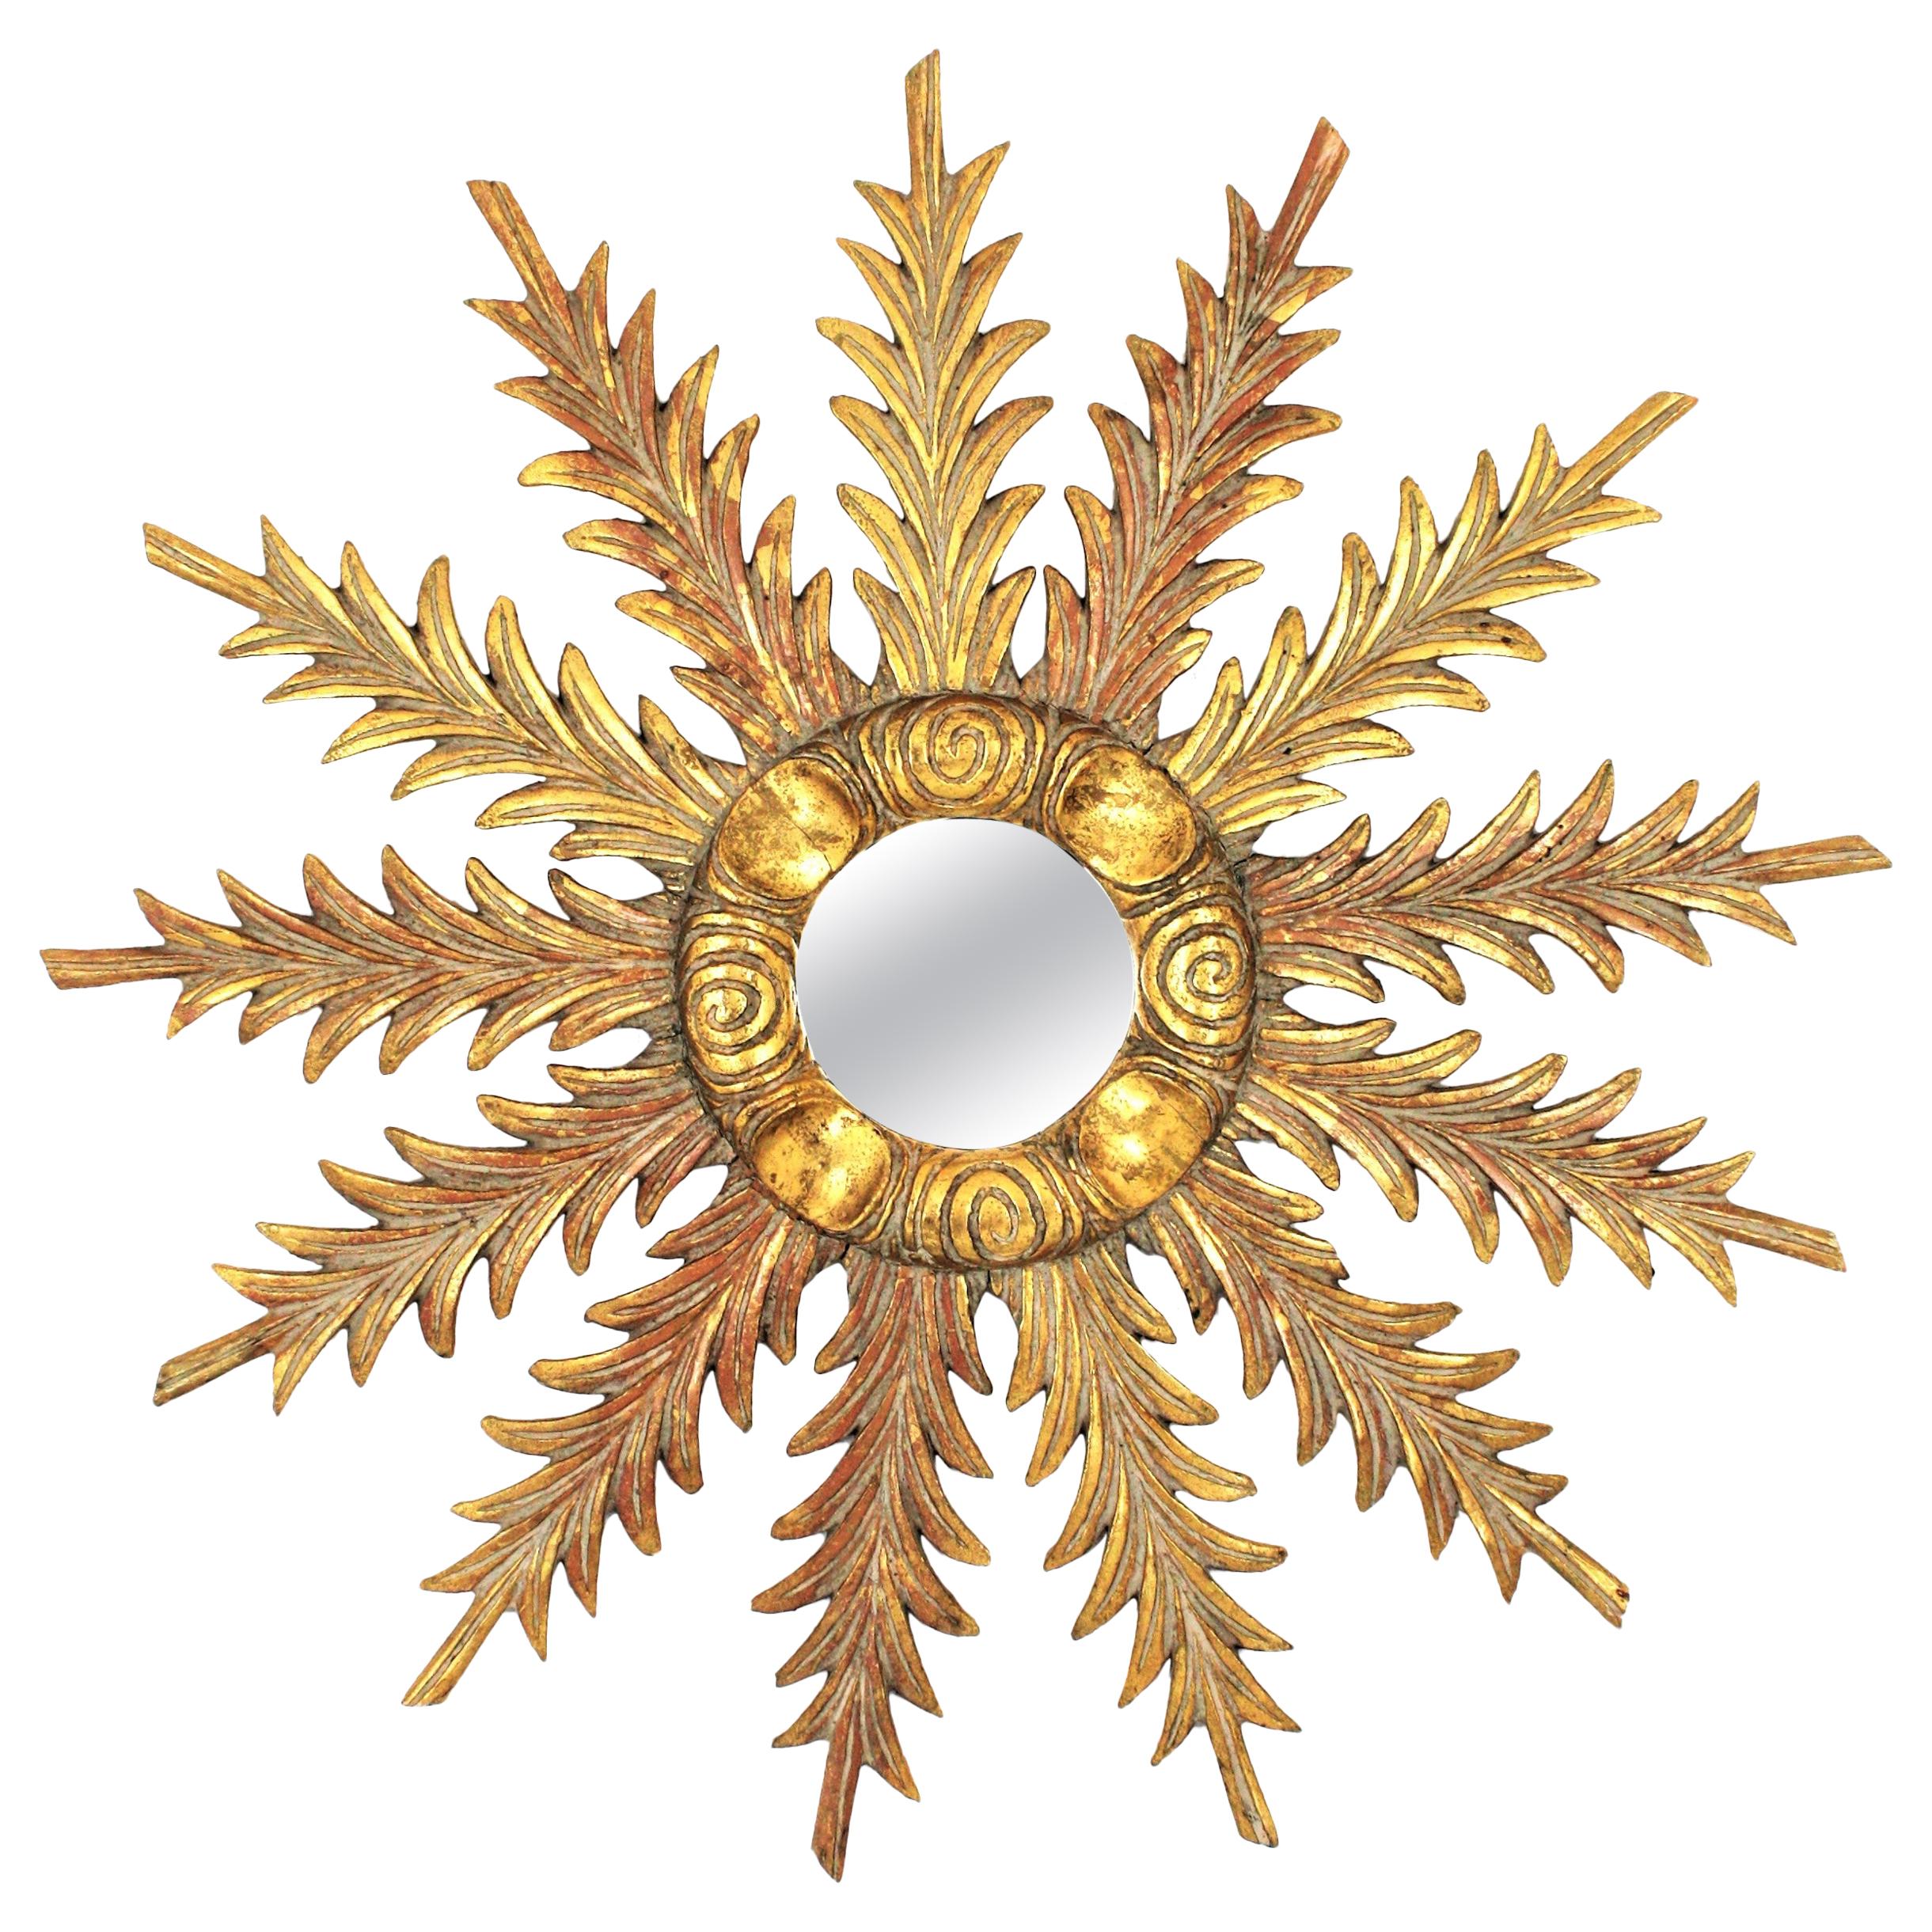 Hollywood Regency Sunburst Starburst Giltwood Mirror with Foliage Carvings, 1940s For Sale